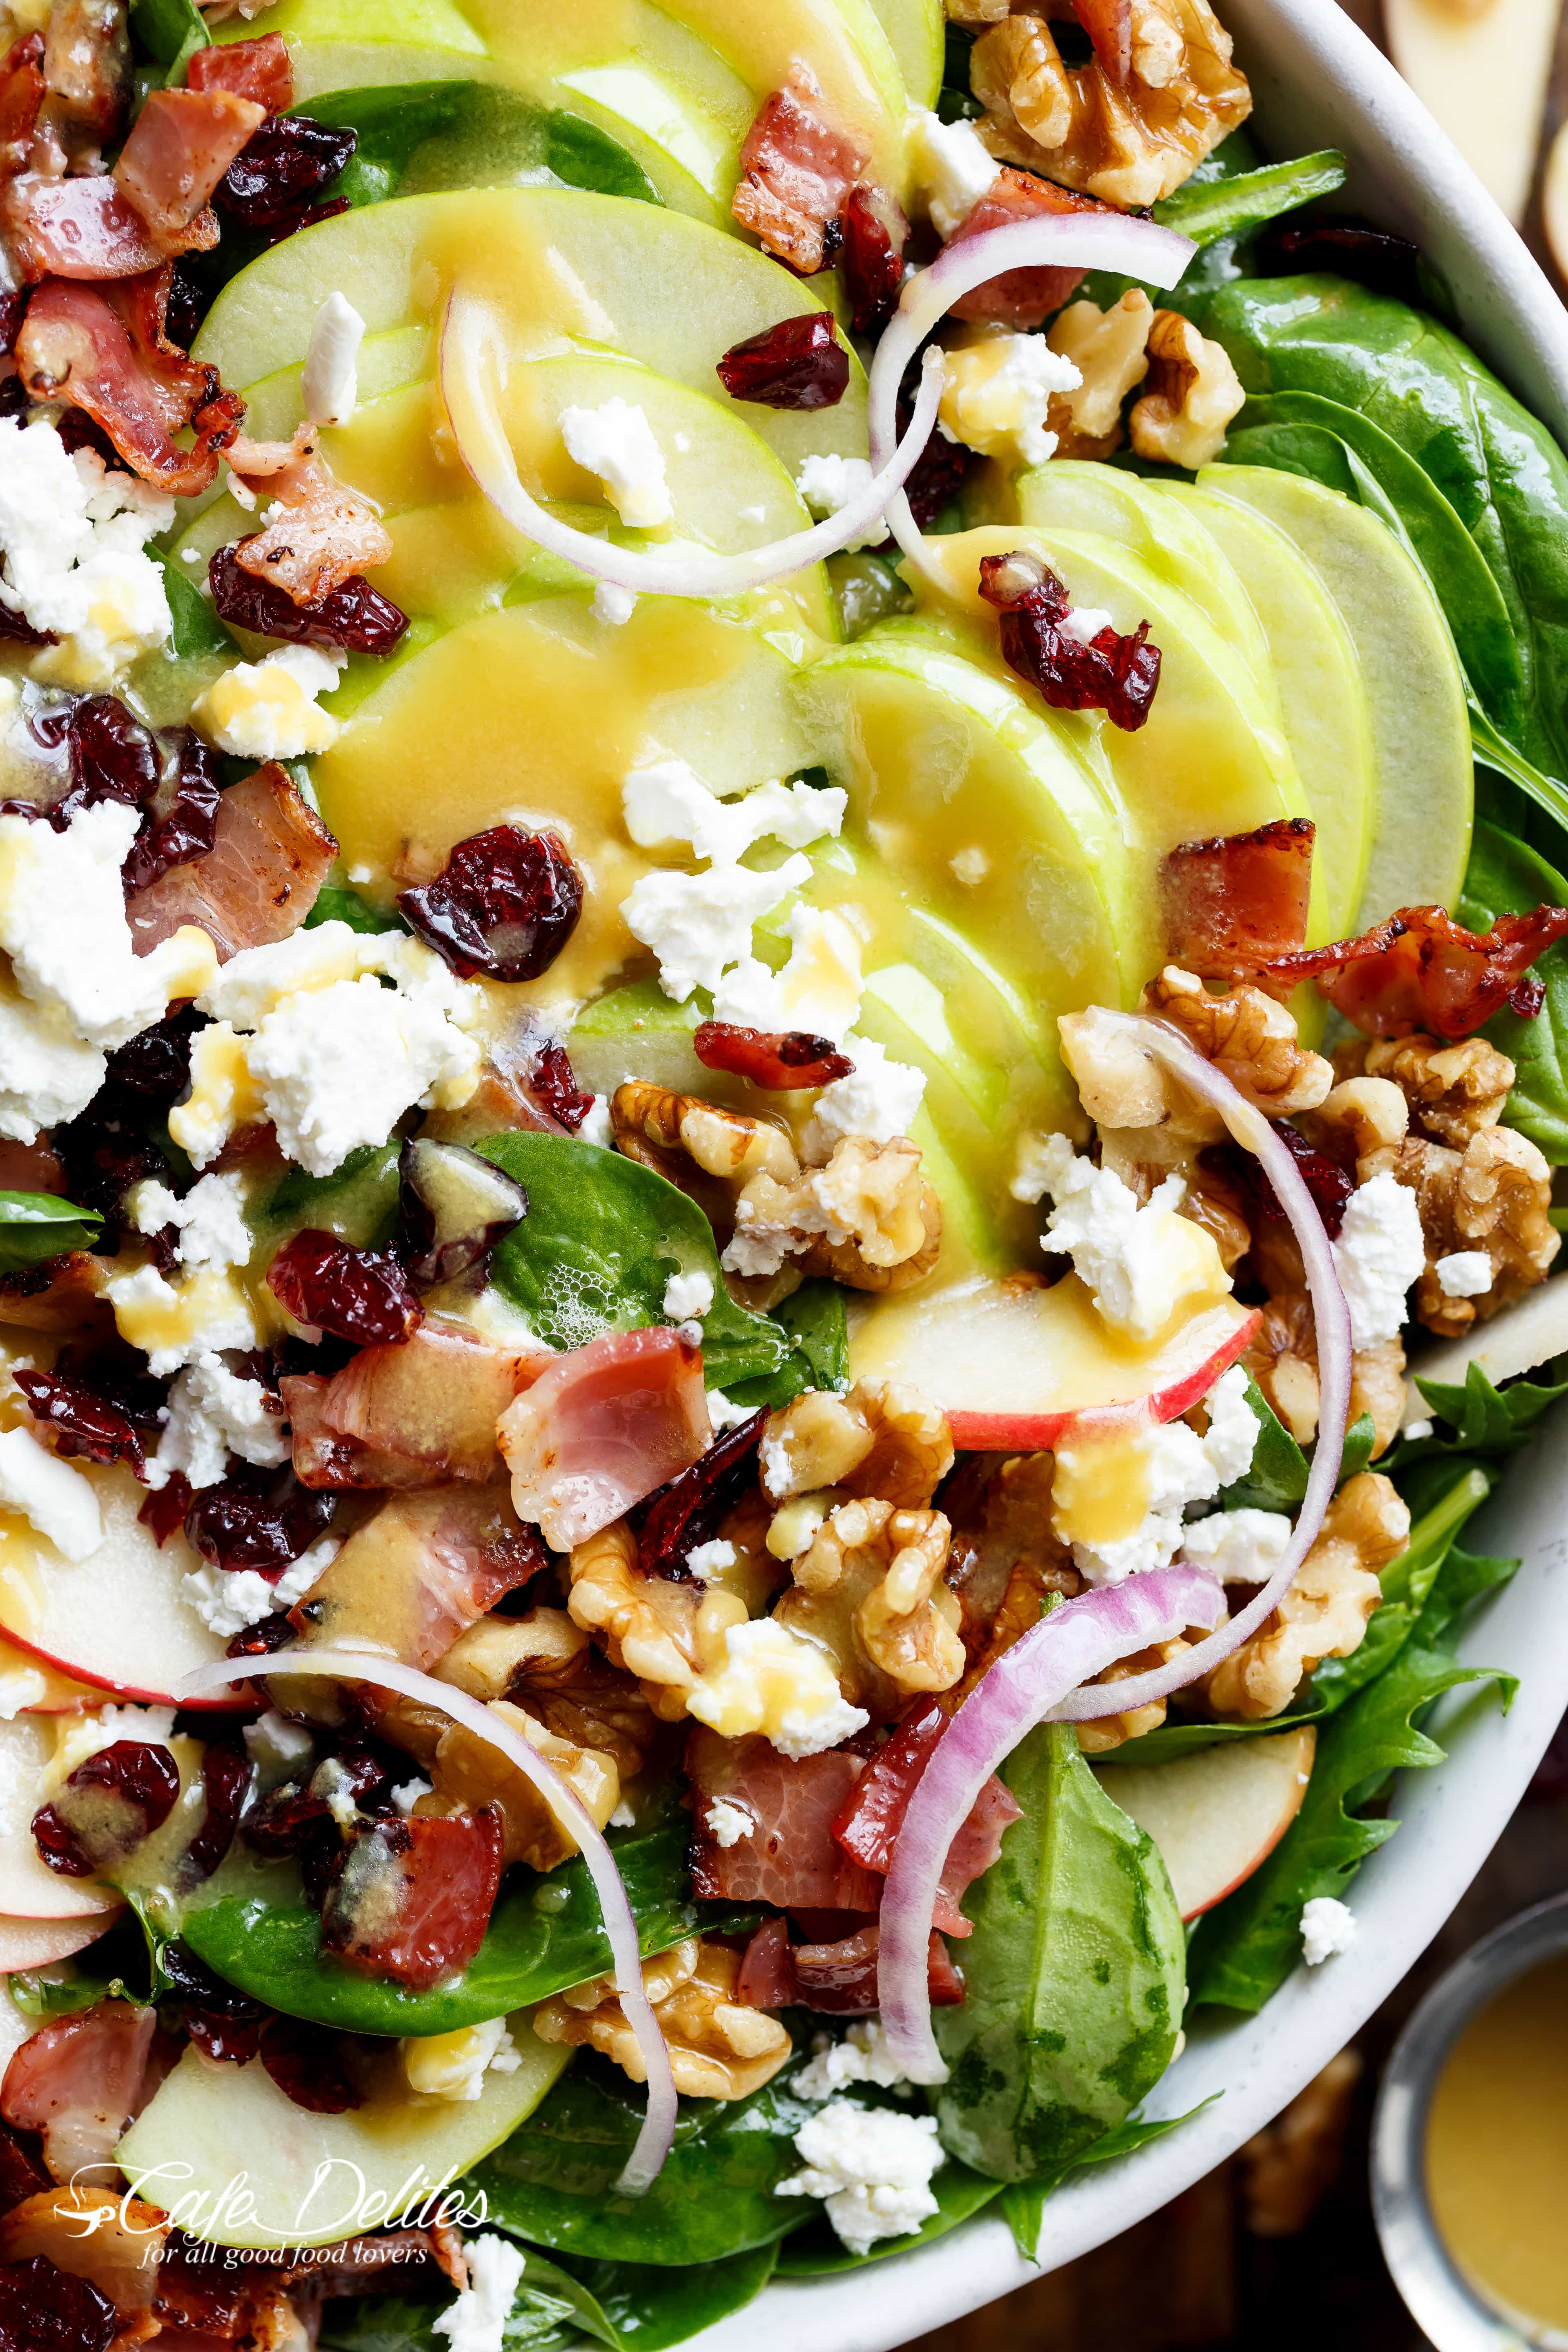 Honey Dijon Apple Bacon Cranberry Salad screams FALL! Cranberries, Spinach, Walnuts And BACON! All drizzled with the most perfect Honey Dijon Dressing! | Cafe Delites